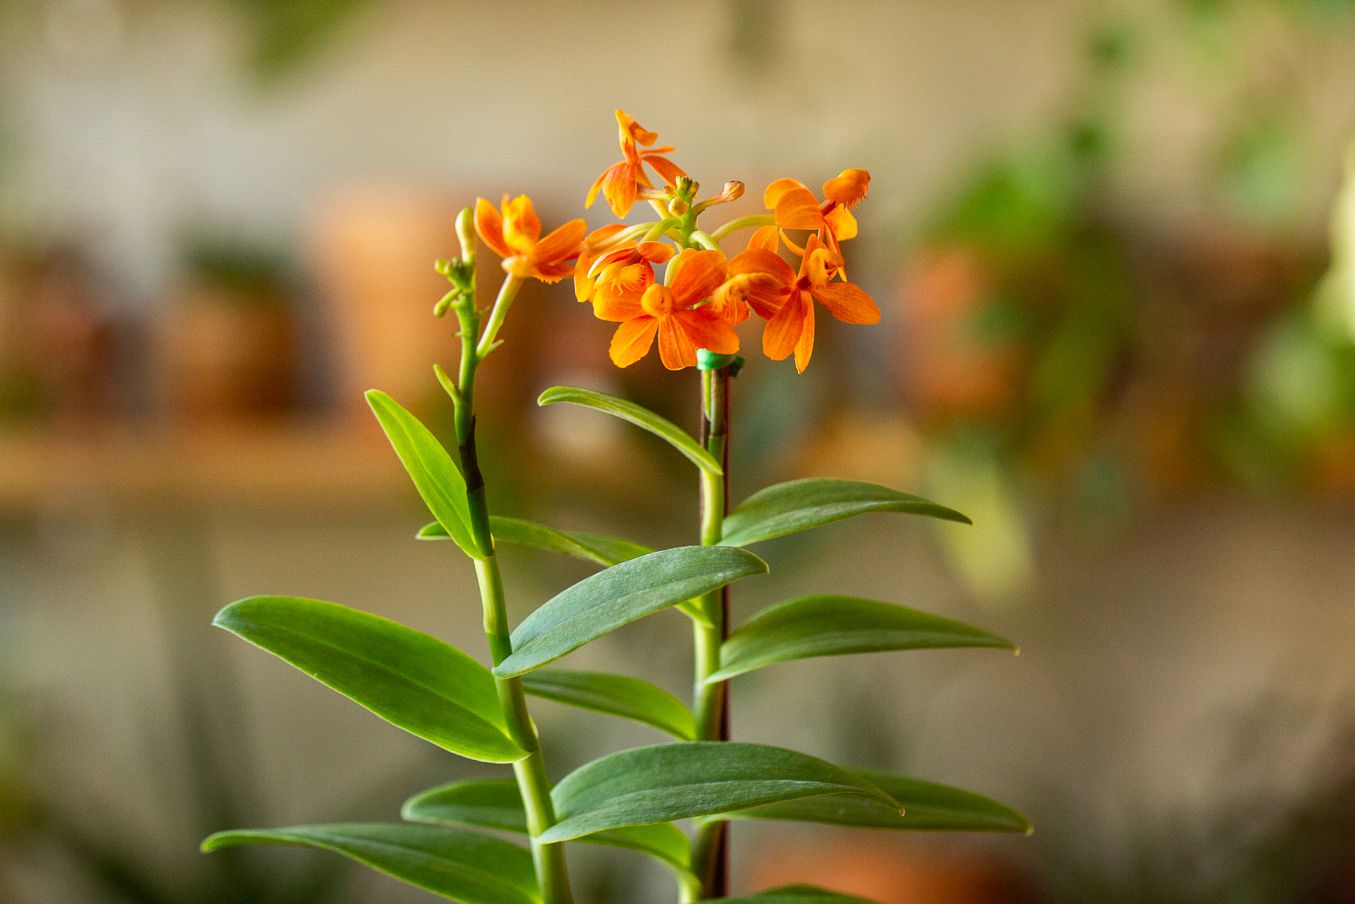 Epidendrum orchids with two stems and small orange flowers closeup